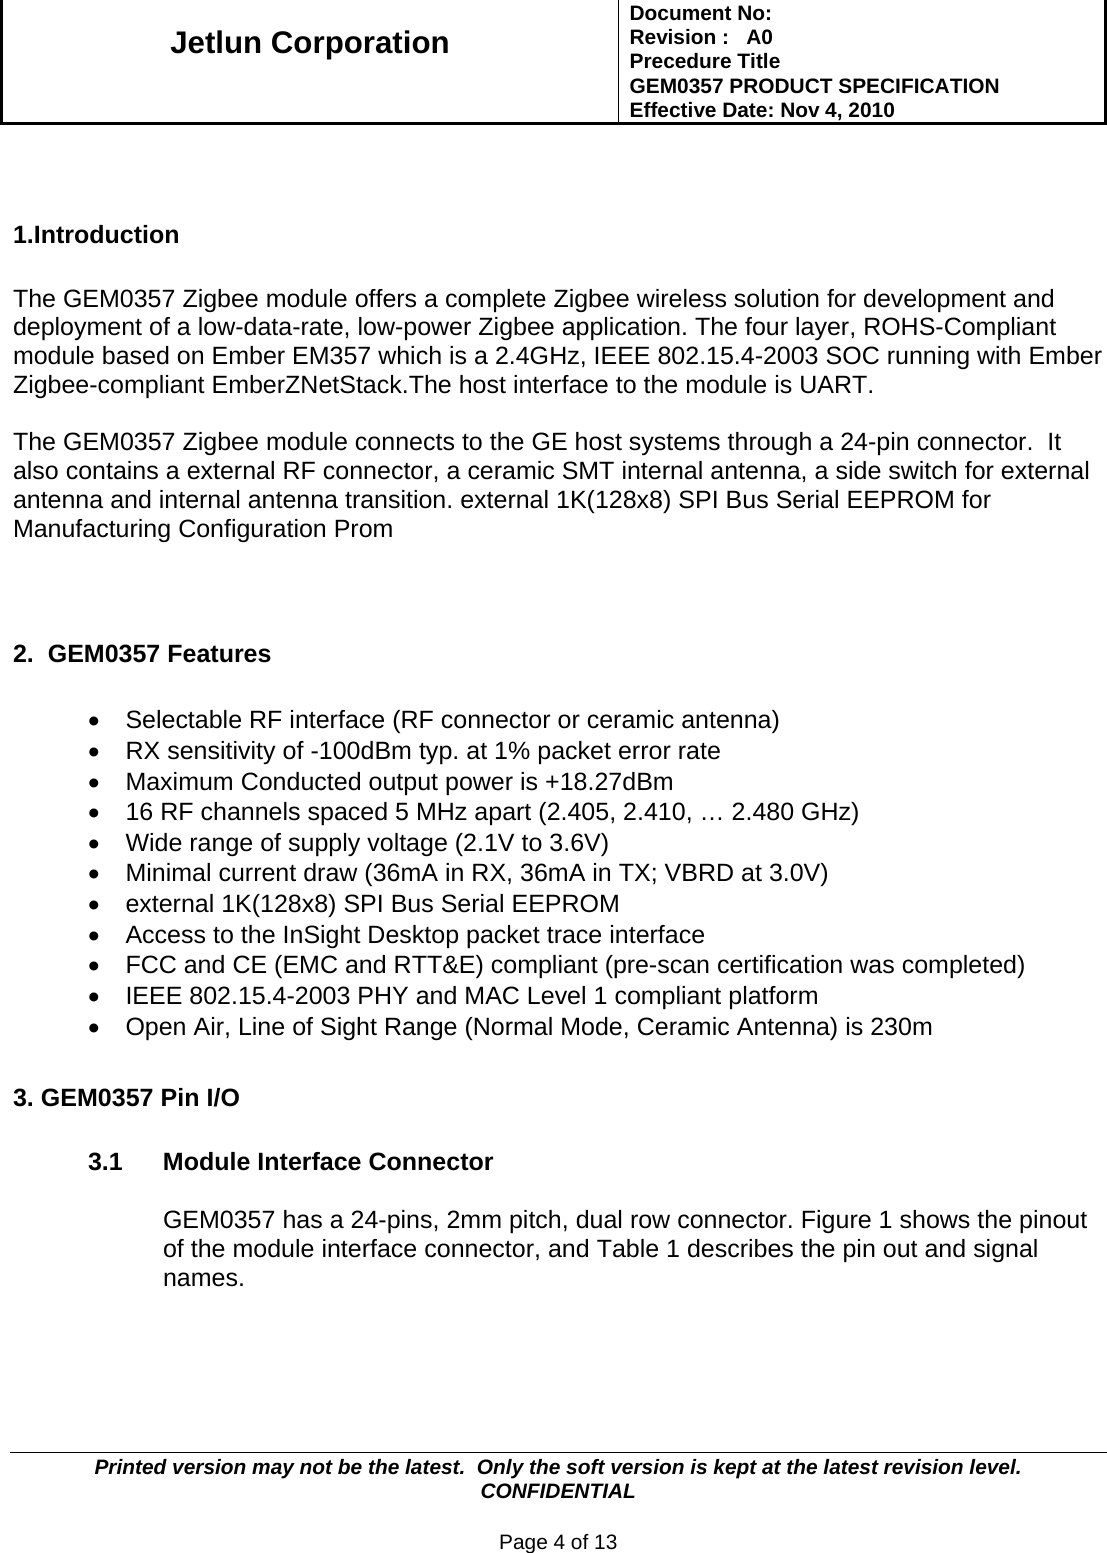   Jetlun Corporation Document No:        Revision :   A0 Precedure Title  GEM0357 PRODUCT SPECIFICATION Effective Date: Nov 4, 2010   Printed version may not be the latest.  Only the soft version is kept at the latest revision level.      CONFIDENTIAL  Page 4 of 13    1.Introduction  The GEM0357 Zigbee module offers a complete Zigbee wireless solution for development and deployment of a low-data-rate, low-power Zigbee application. The four layer, ROHS-Compliant module based on Ember EM357 which is a 2.4GHz, IEEE 802.15.4-2003 SOC running with Ember Zigbee-compliant EmberZNetStack.The host interface to the module is UART.  The GEM0357 Zigbee module connects to the GE host systems through a 24-pin connector.  It also contains a external RF connector, a ceramic SMT internal antenna, a side switch for external antenna and internal antenna transition. external 1K(128x8) SPI Bus Serial EEPROM for Manufacturing Configuration Prom    2.  GEM0357 Features  •  Selectable RF interface (RF connector or ceramic antenna) •  RX sensitivity of -100dBm typ. at 1% packet error rate •  Maximum Conducted output power is +18.27dBm  •  16 RF channels spaced 5 MHz apart (2.405, 2.410, … 2.480 GHz) •  Wide range of supply voltage (2.1V to 3.6V) •  Minimal current draw (36mA in RX, 36mA in TX; VBRD at 3.0V) •  external 1K(128x8) SPI Bus Serial EEPROM •  Access to the InSight Desktop packet trace interface •  FCC and CE (EMC and RTT&amp;E) compliant (pre-scan certification was completed) •  IEEE 802.15.4-2003 PHY and MAC Level 1 compliant platform •  Open Air, Line of Sight Range (Normal Mode, Ceramic Antenna) is 230m  3. GEM0357 Pin I/O            3.1  Module Interface Connector  GEM0357 has a 24-pins, 2mm pitch, dual row connector. Figure 1 shows the pinout of the module interface connector, and Table 1 describes the pin out and signal names.    